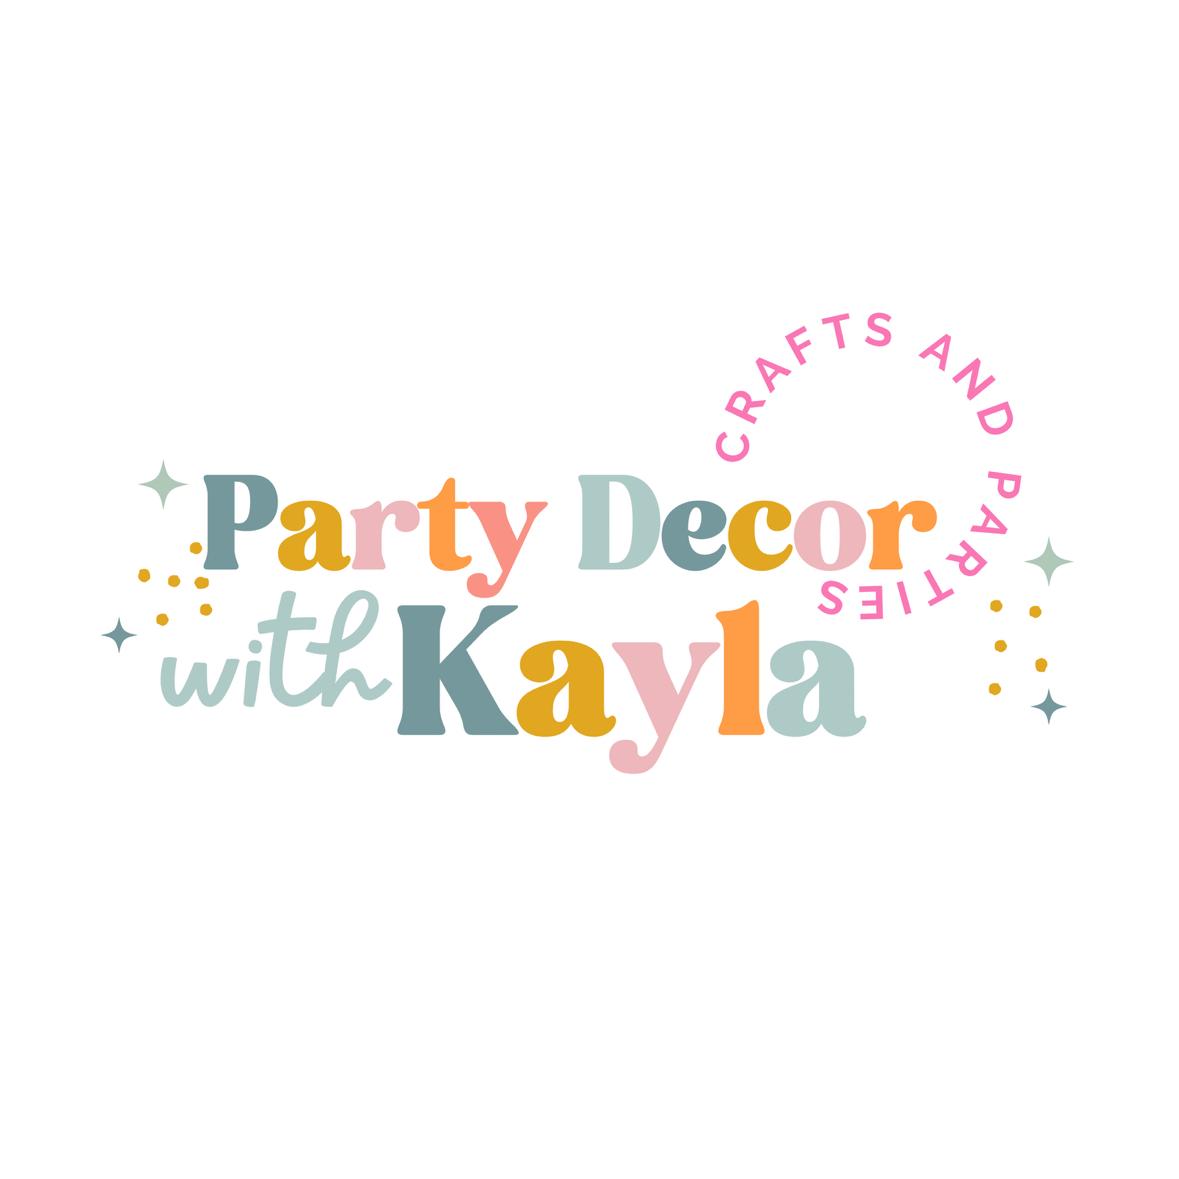 KLPartyDecor's images